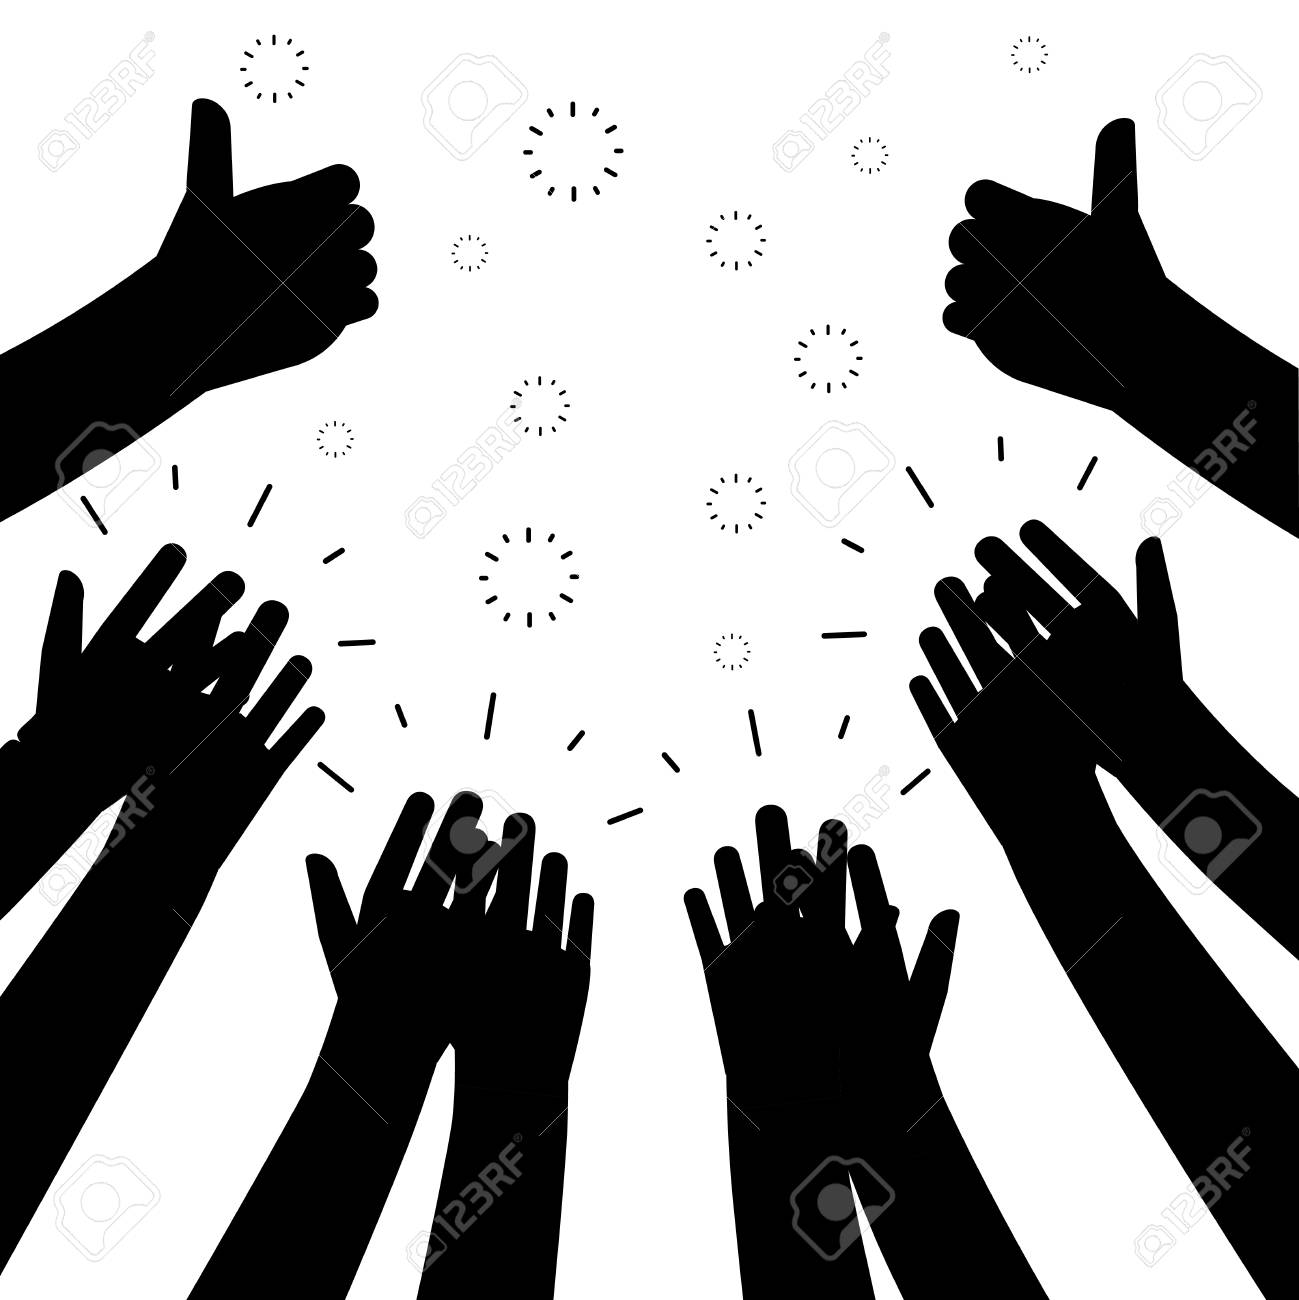 Black Clapping Hands Vector Silhouettes Isolated On White